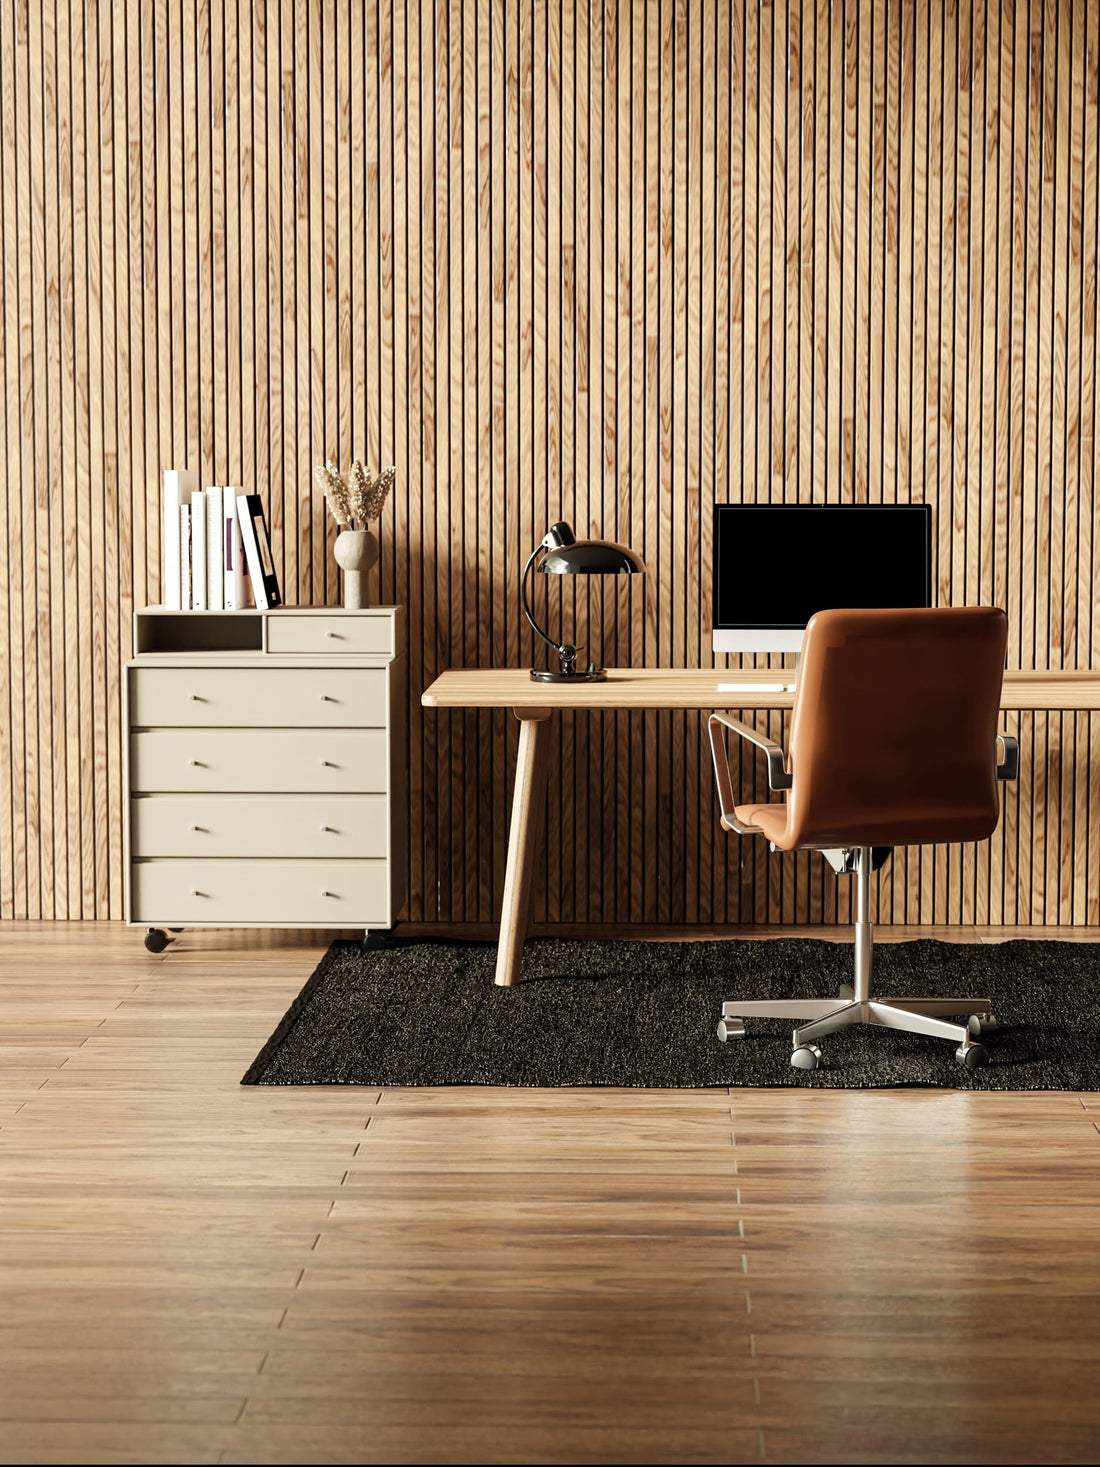 How to decorate your home office with a rug